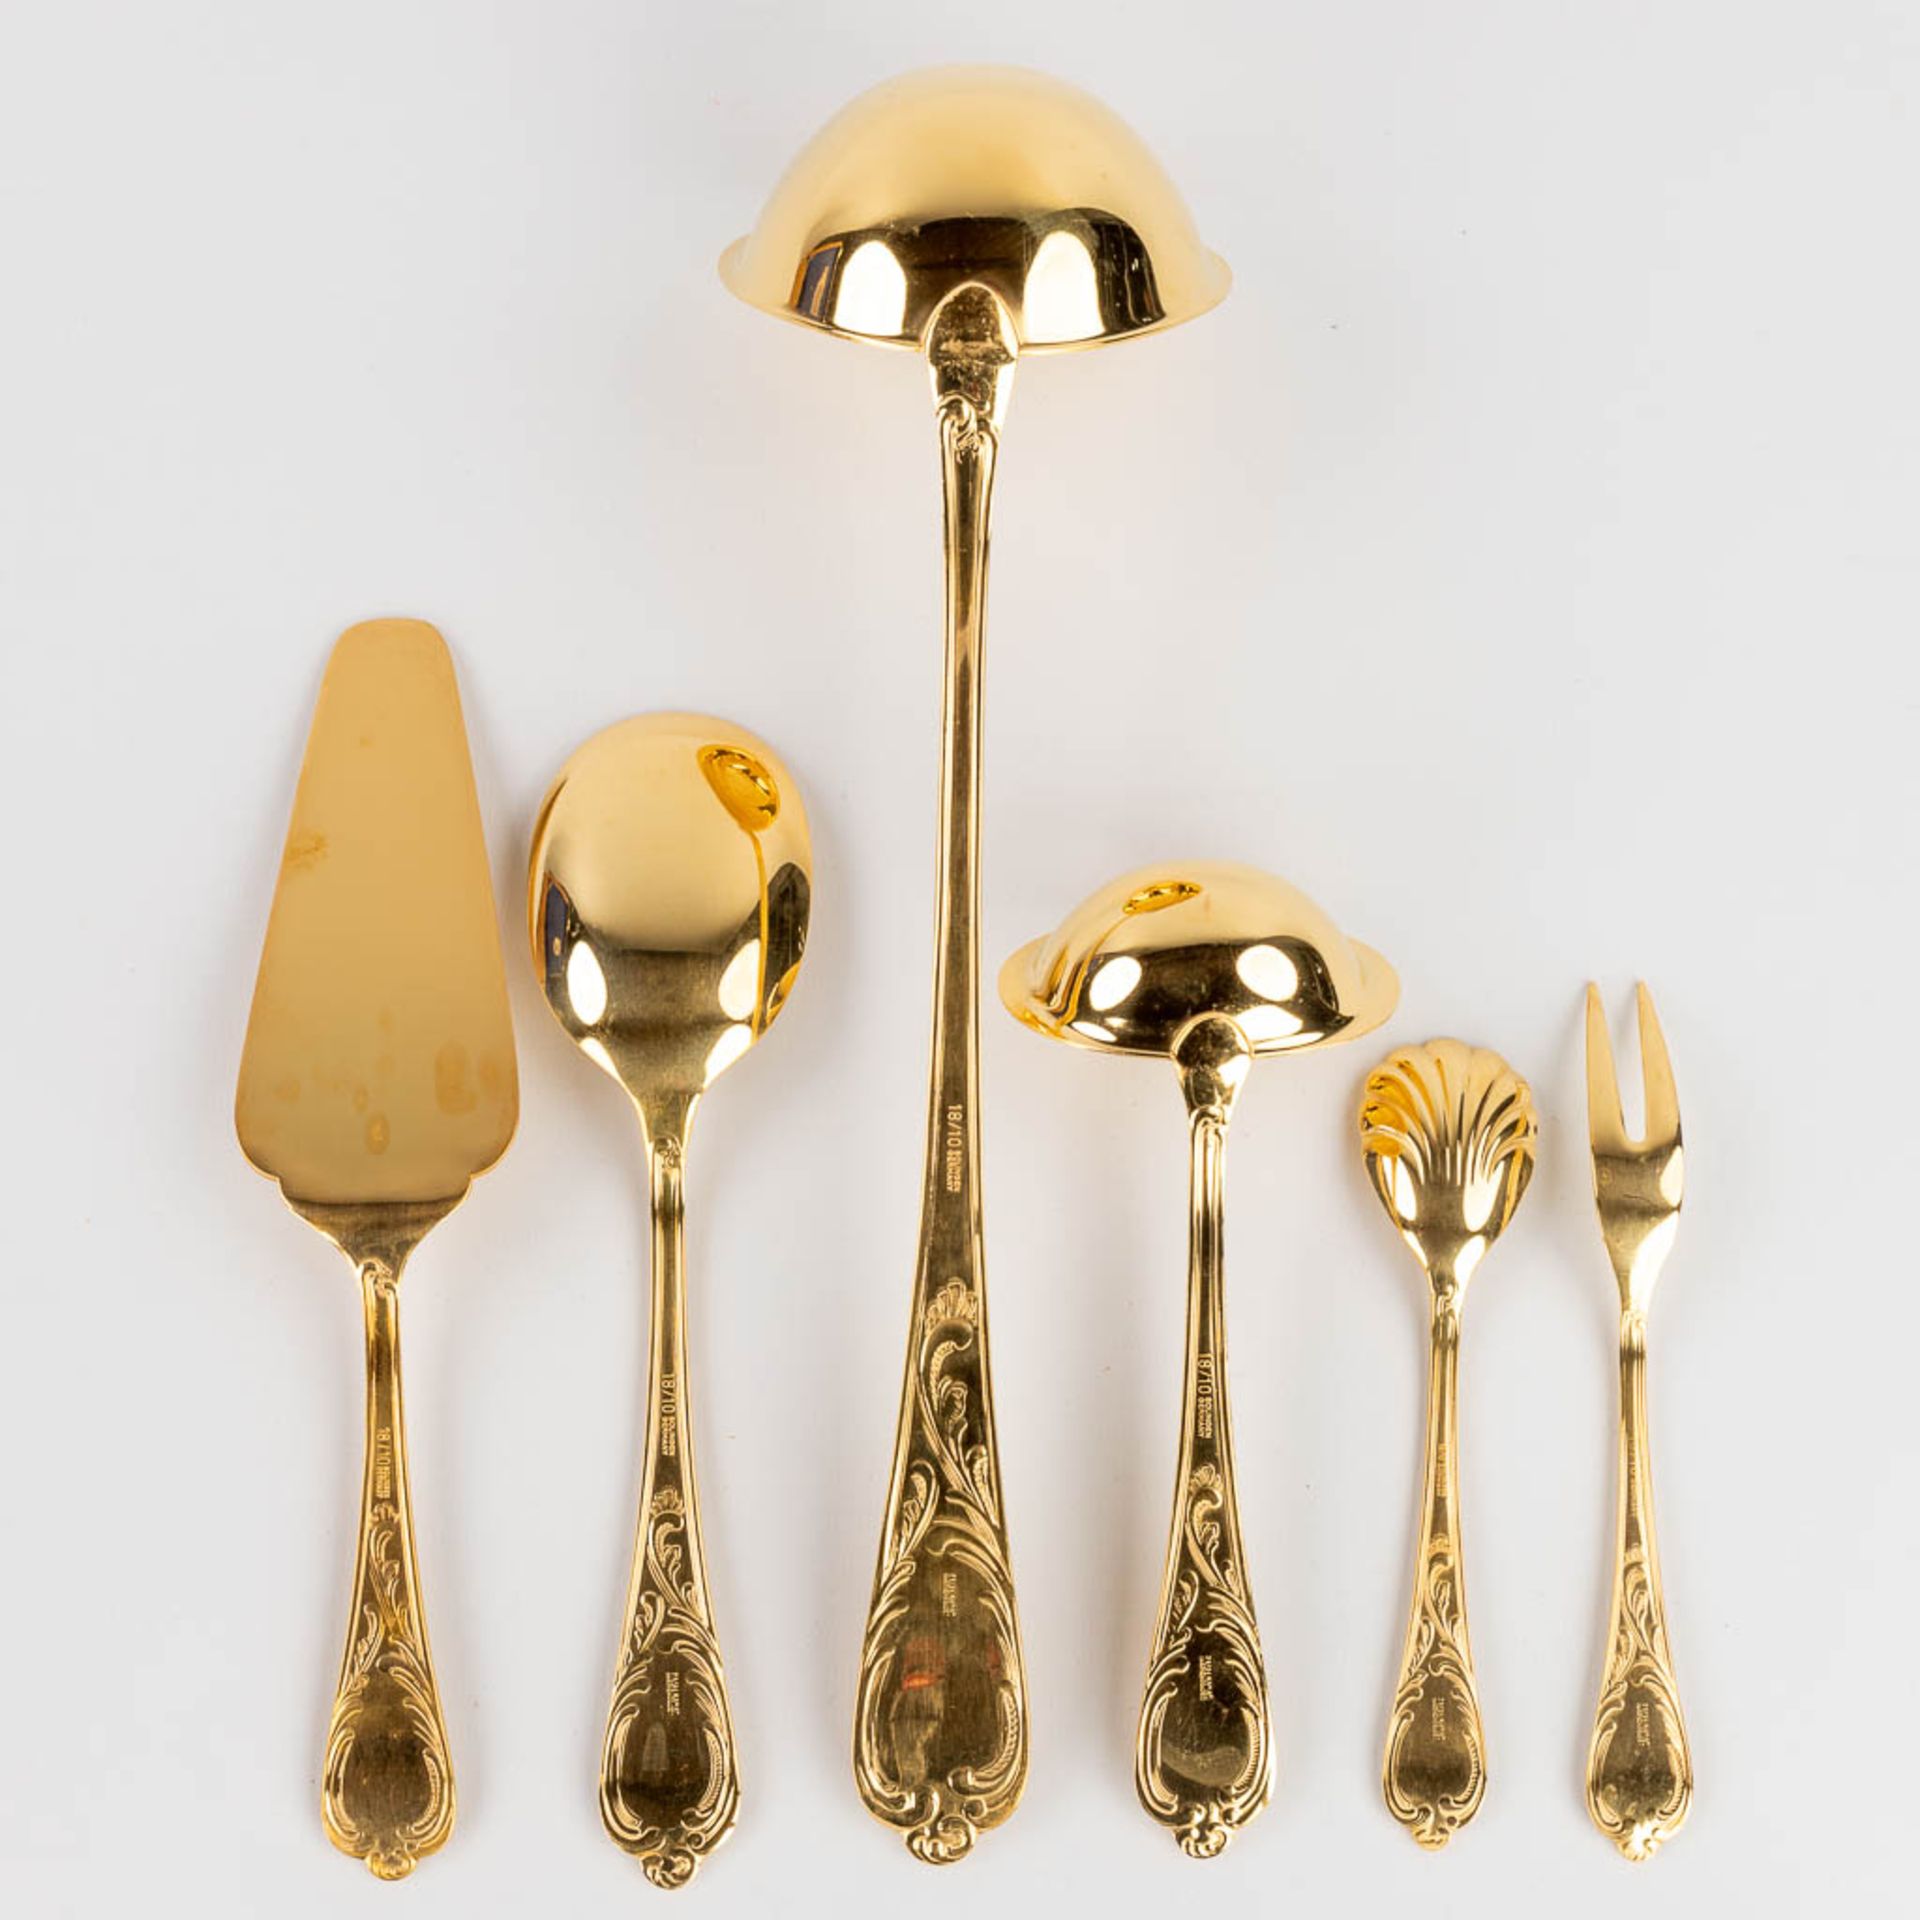 A gold-plated 'Royal Collection Solingen' flatware cutlery set, made in Germany (L:34 x W:45,5 x H:9 - Image 11 of 15